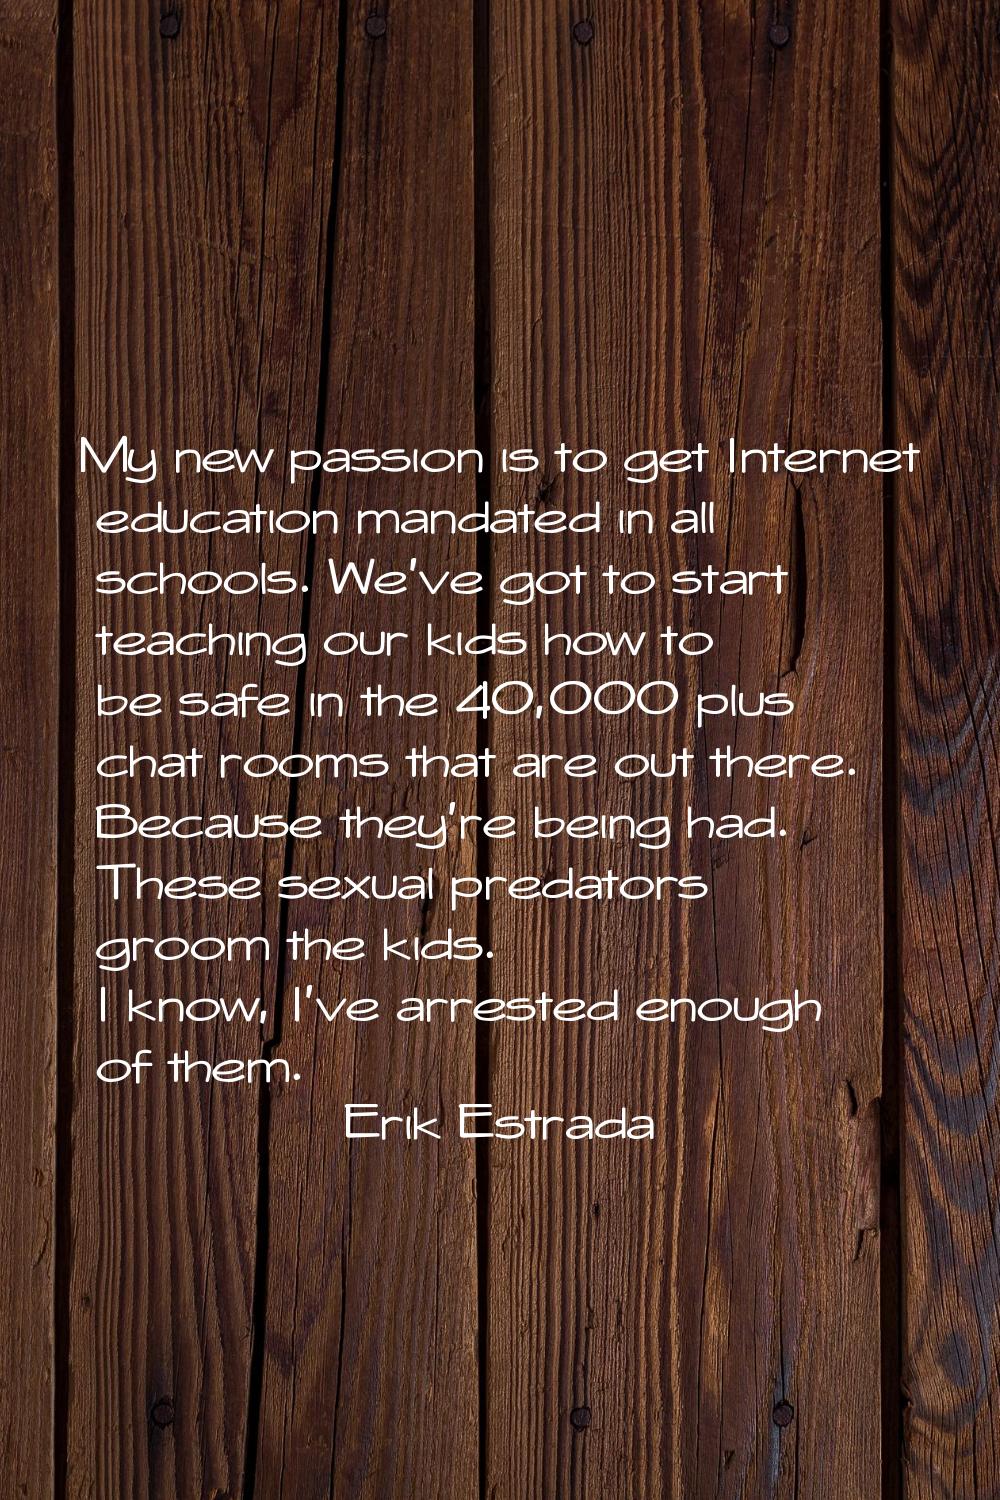 My new passion is to get Internet education mandated in all schools. We've got to start teaching ou